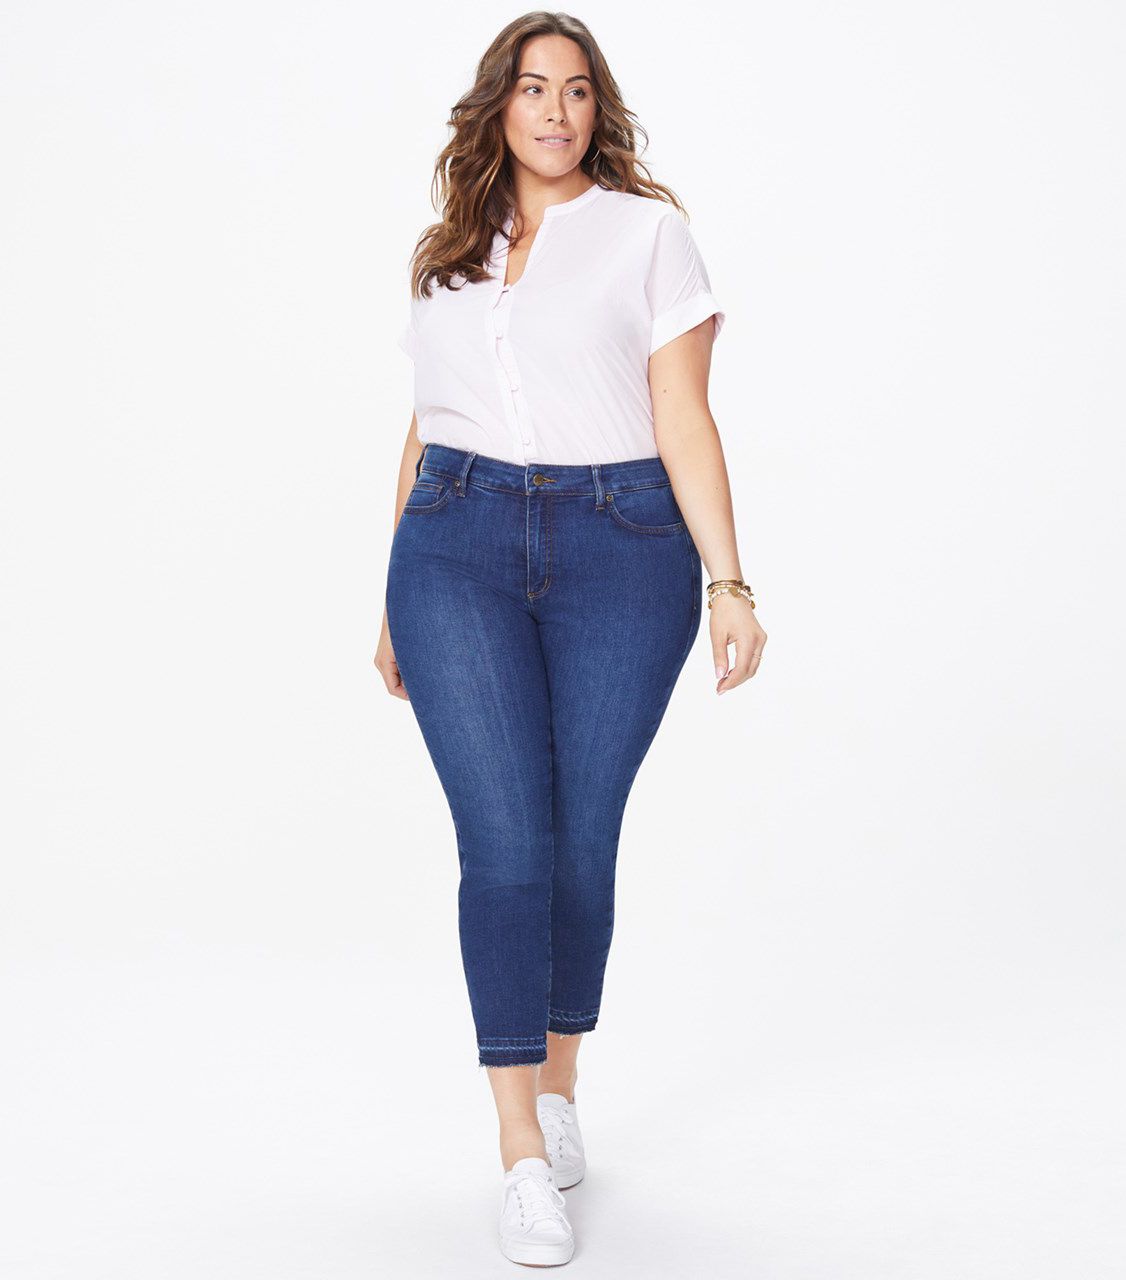 What Bloggers Think of Plus Size Denim in the Fashion | Who What Wear